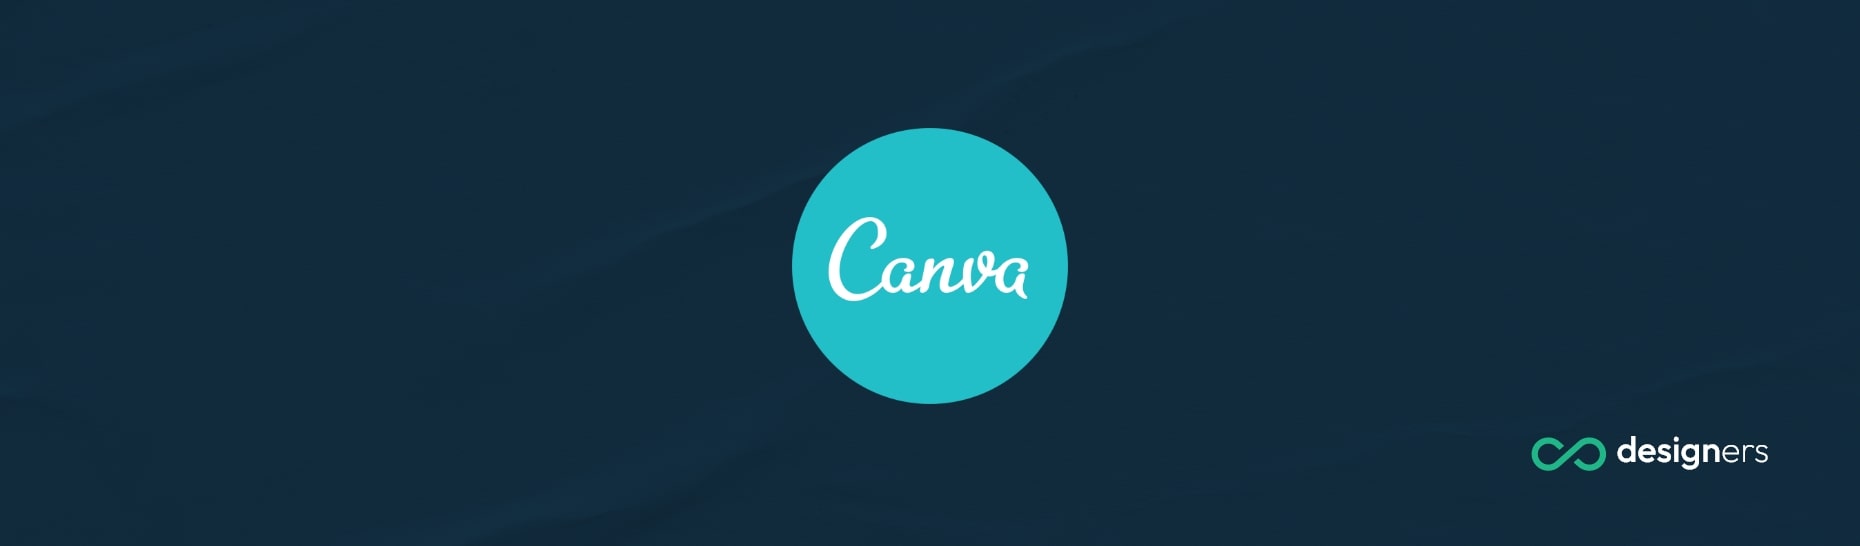 How Do I Print a Place Card in Canva? 